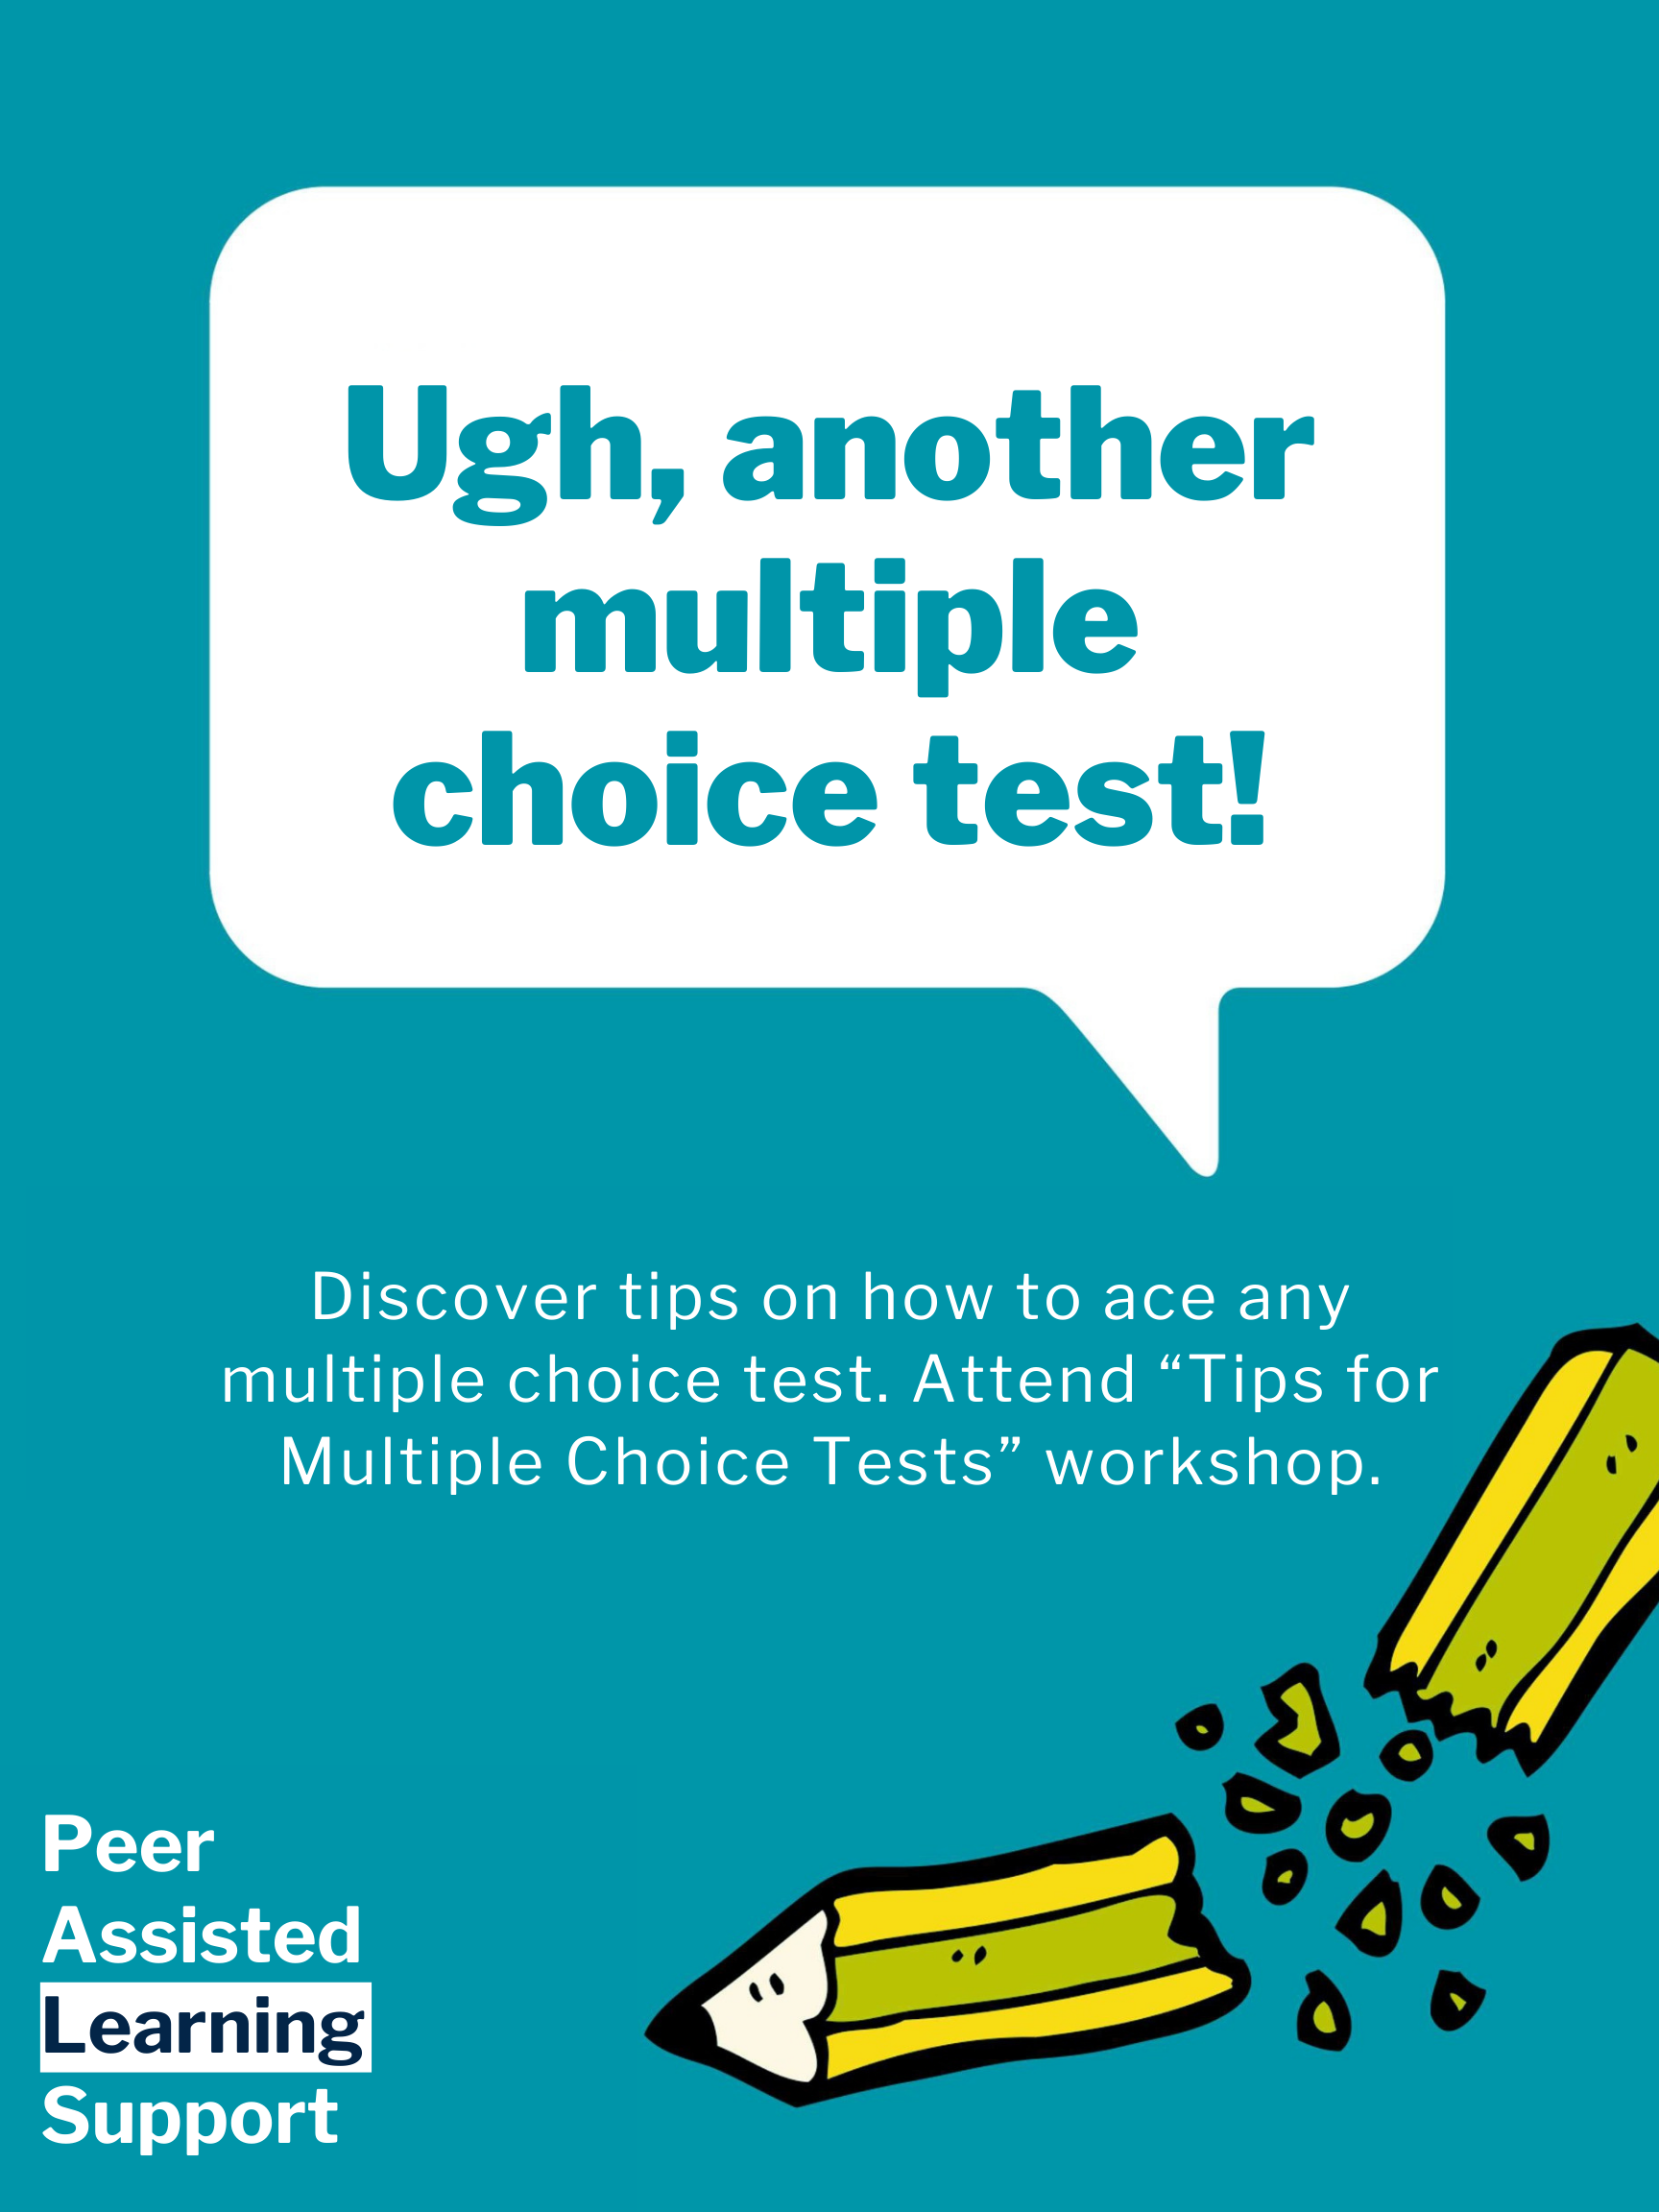 “Ugh, another multiple choice test!” in a speech bubble